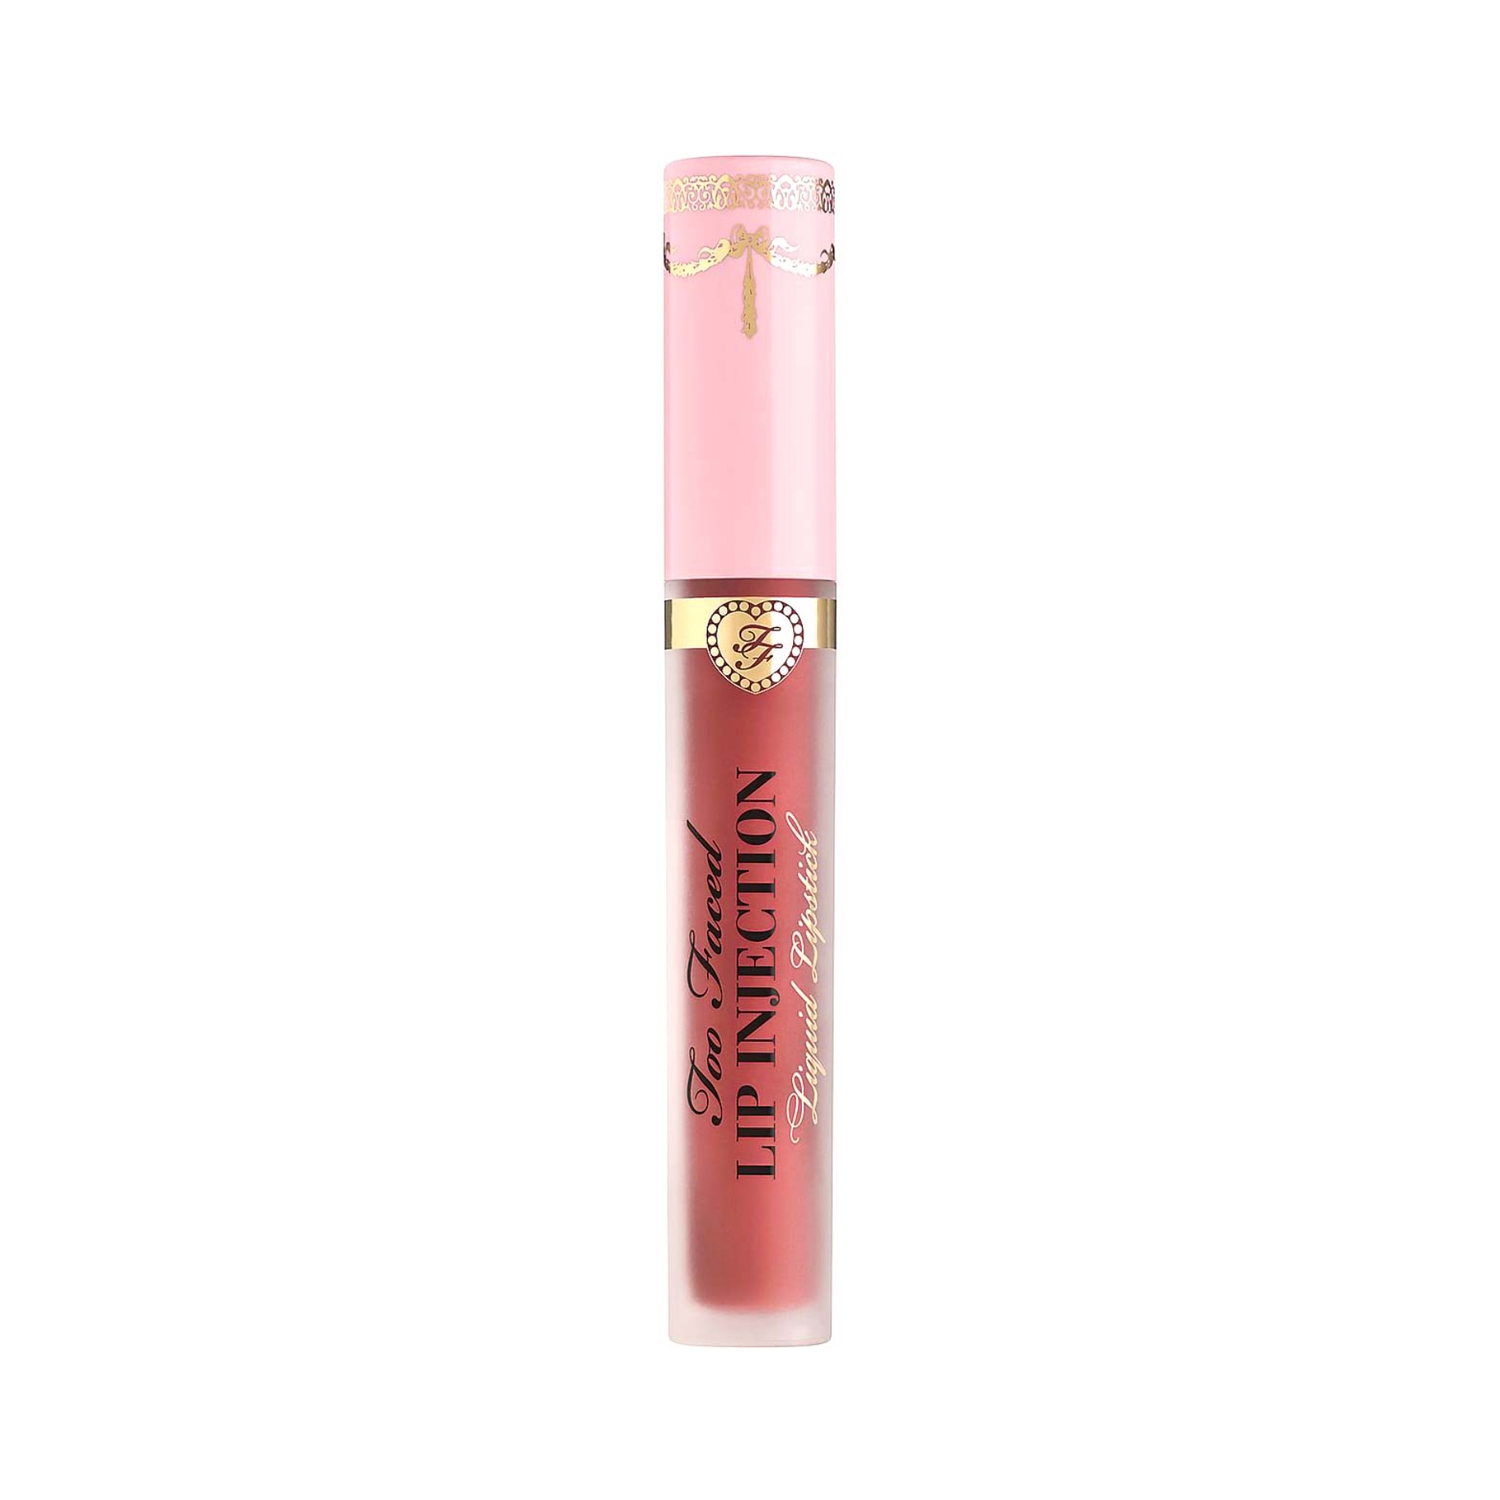 Too Faced | Too Faced Lip Injection Liquid Lipstick - Plump You Up (3ml)